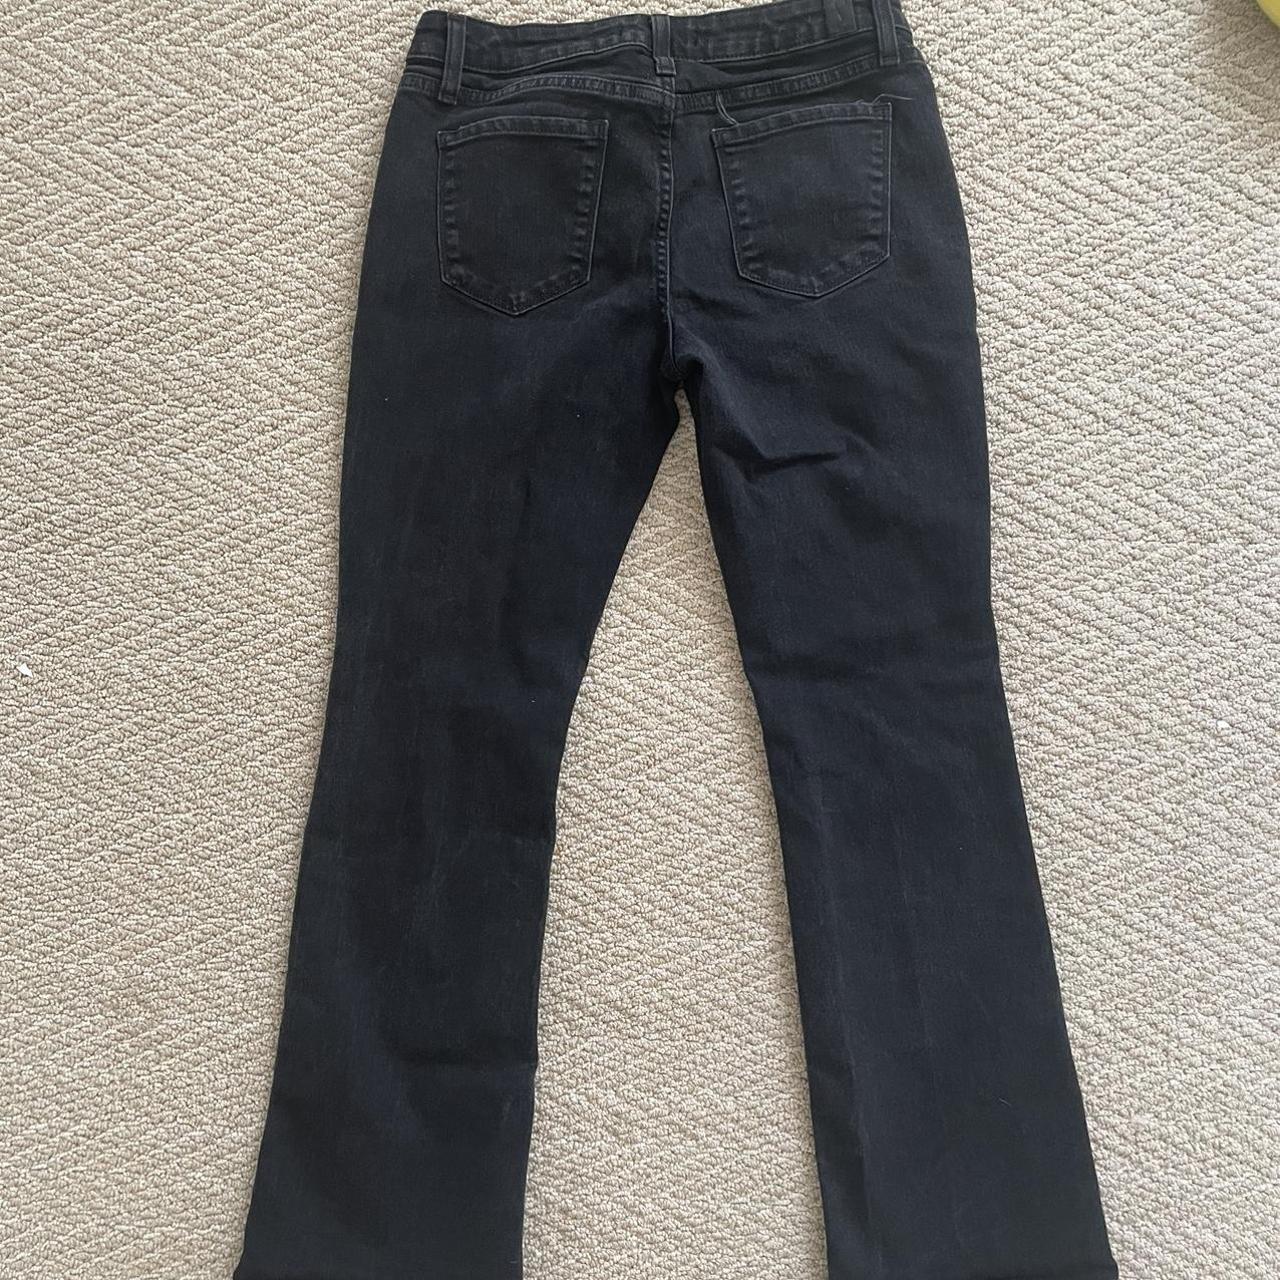 SIMPLY VERA WANG BOOT CUT JEANS- These jeans are - Depop